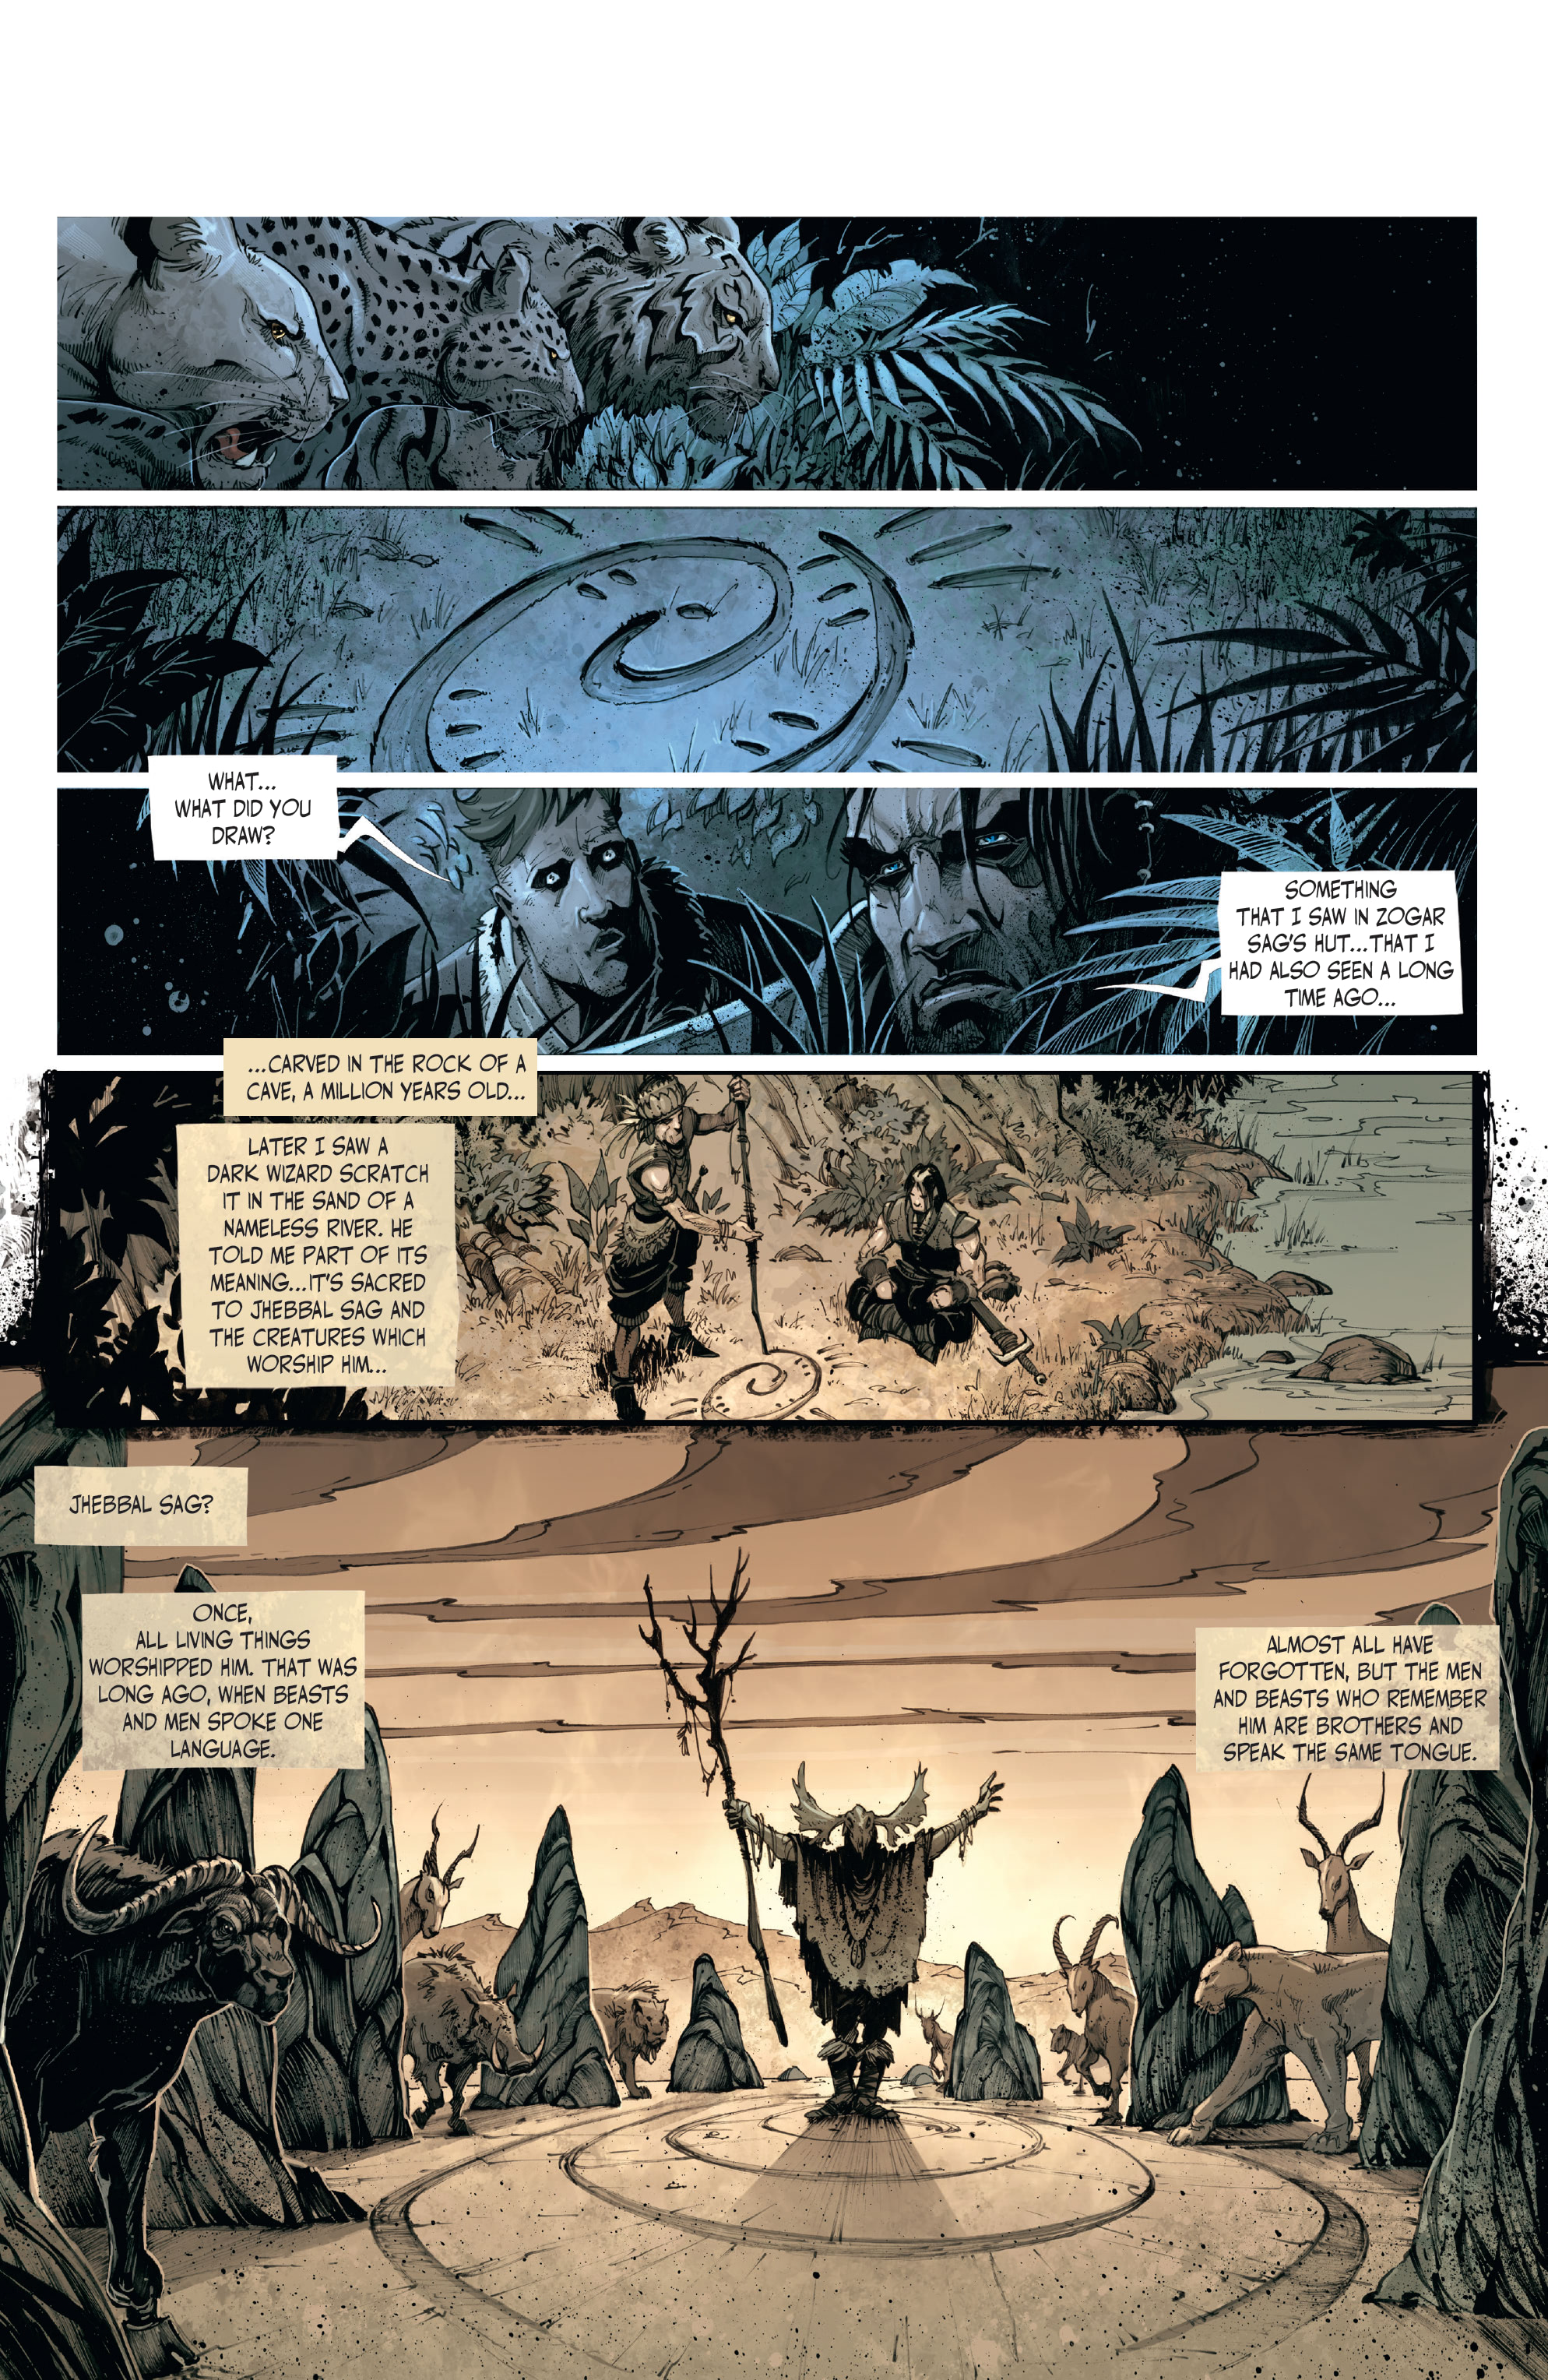 The Cimmerian: Beyond the Black River (2021-): Chapter 2 - Page 4